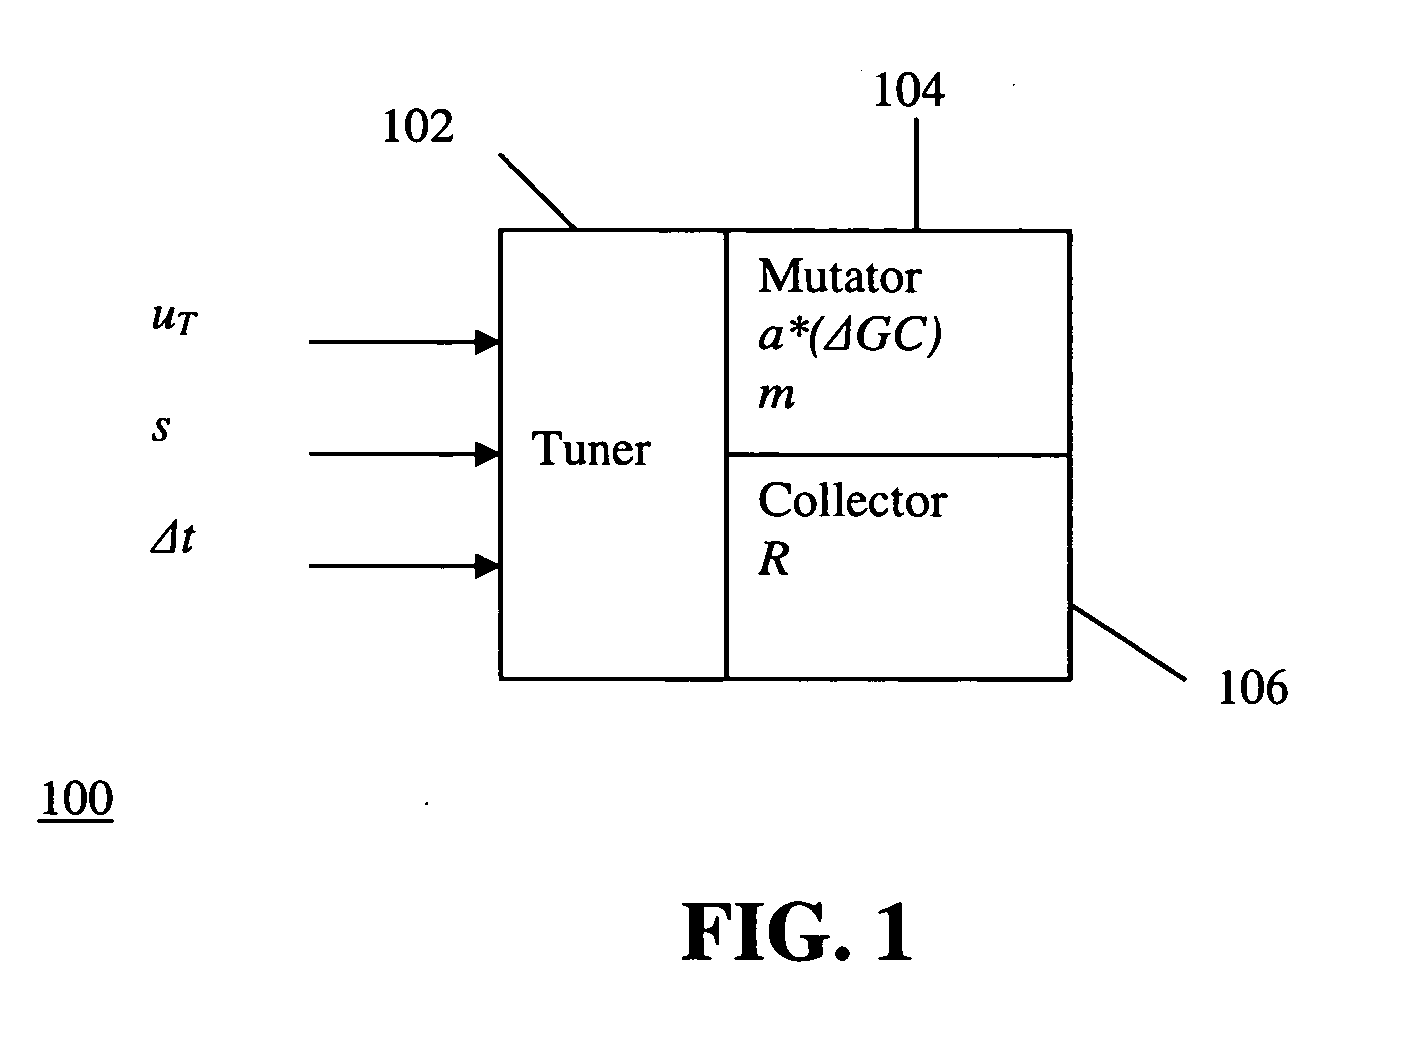 Method and apparatus for dynamic incremental defragmentation of memory